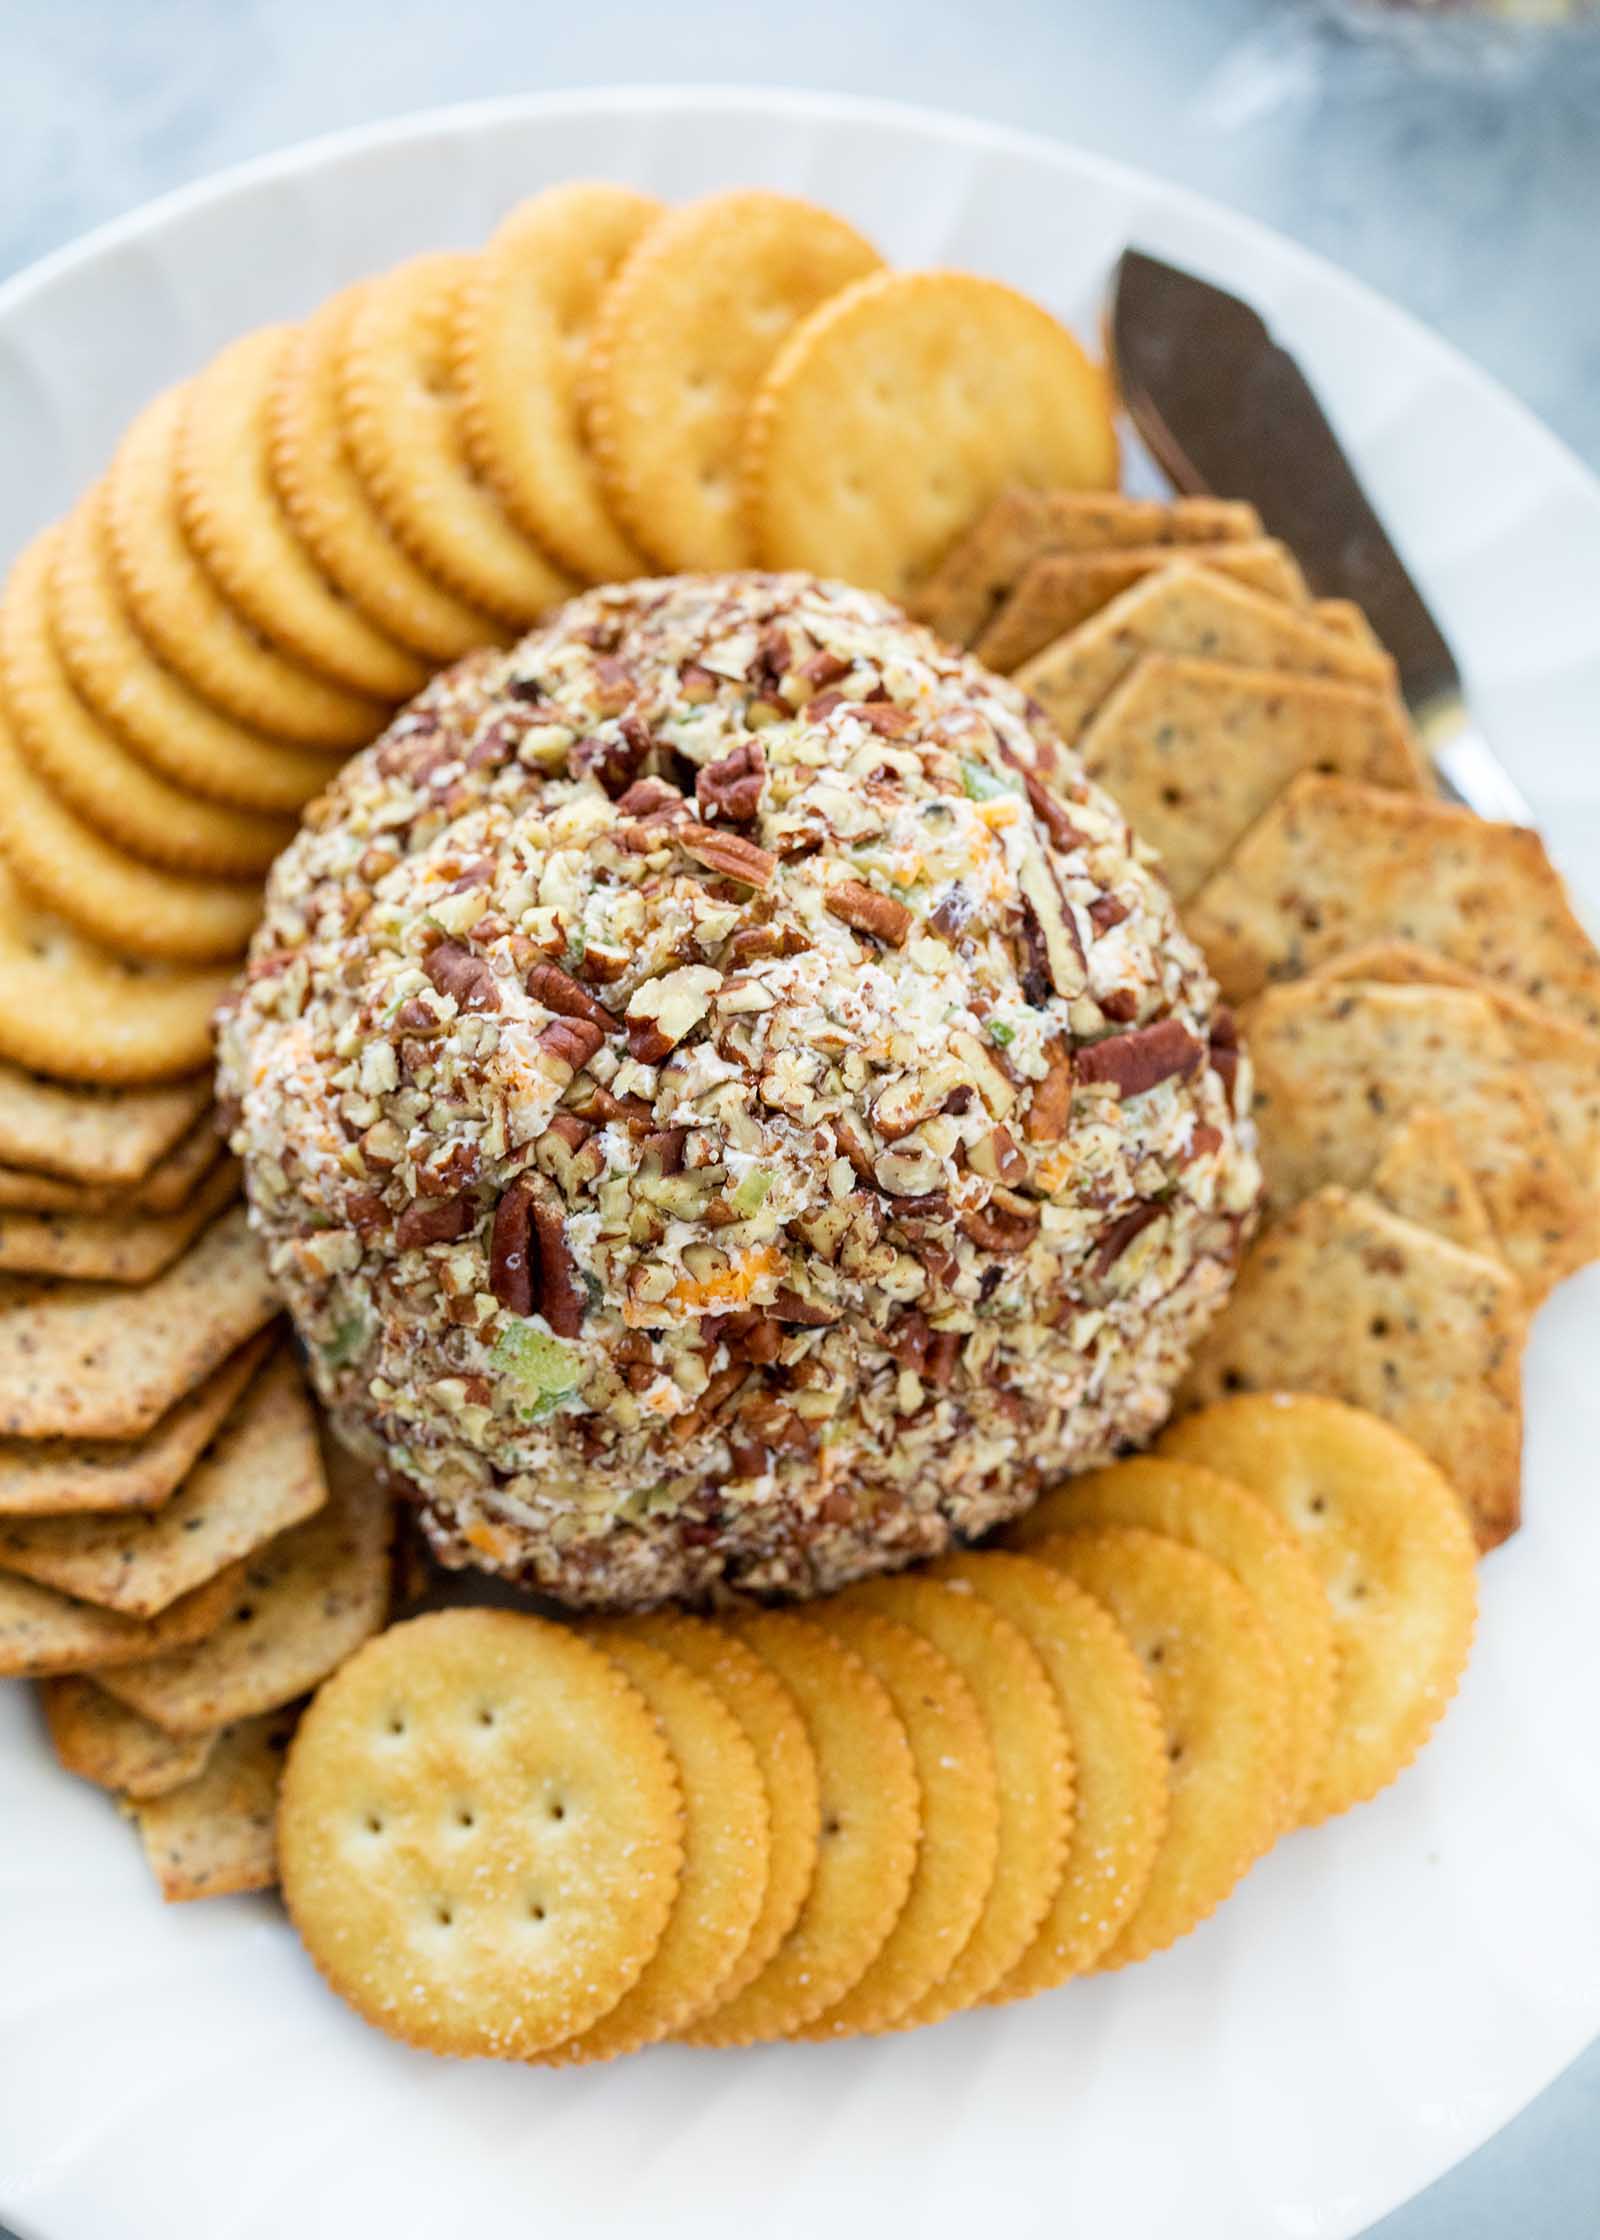 Classic cheeseball in the center of a platter and surrounded by crackers.